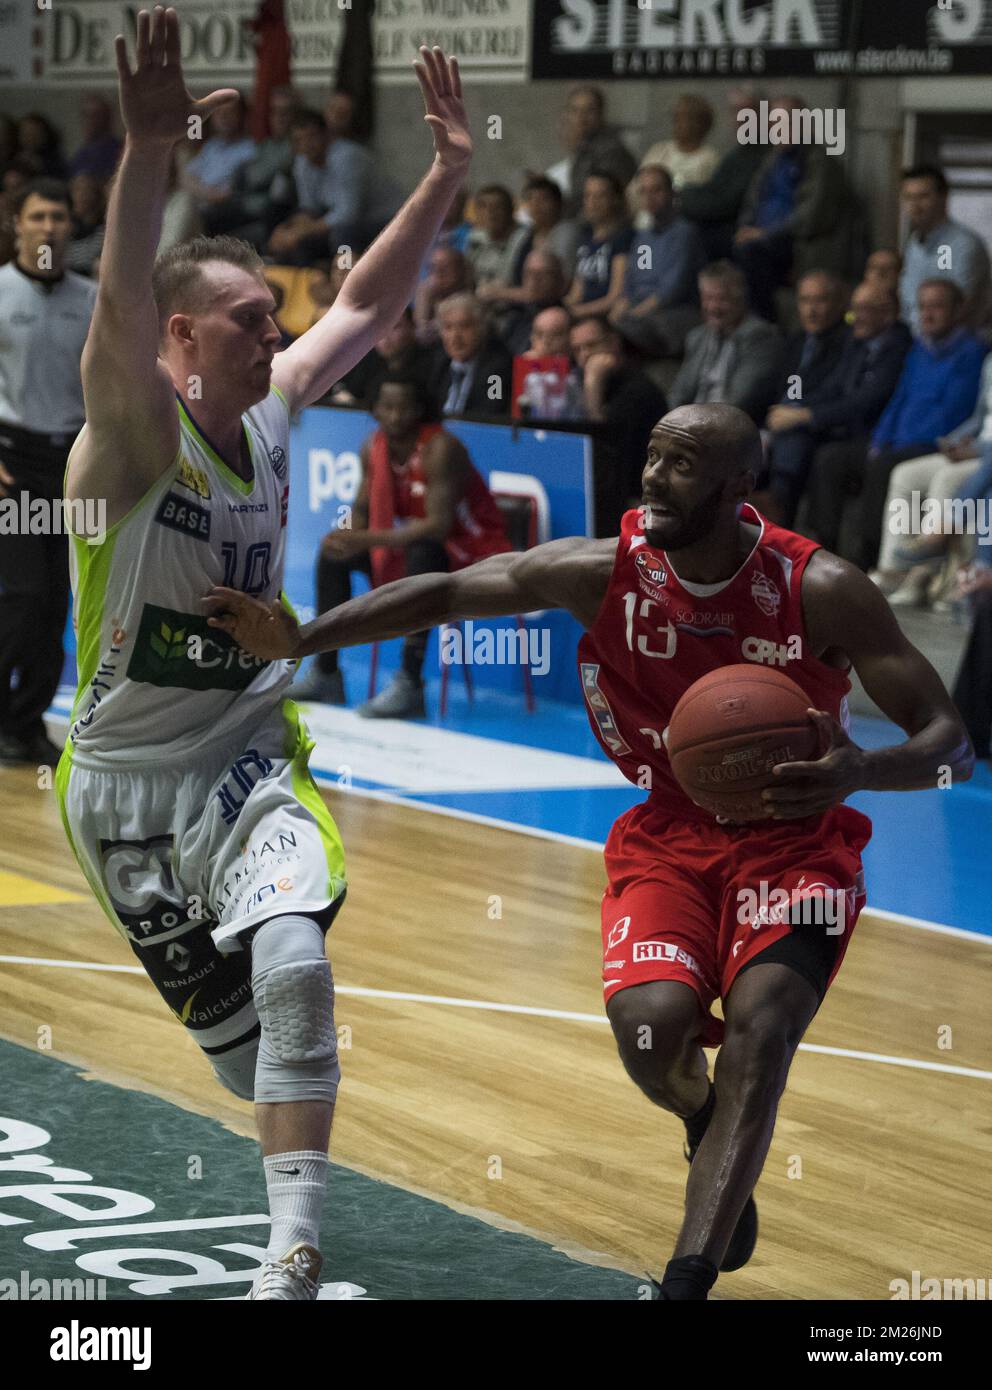 Aalstar's Olivier Troisfontaines and Charleroi's Keaton Grant fight for the  ball during the basketball game between Okapi Aalstar and Spirou Charleroi,  on day 31 of the EuroMillions League basket competition, on Friday